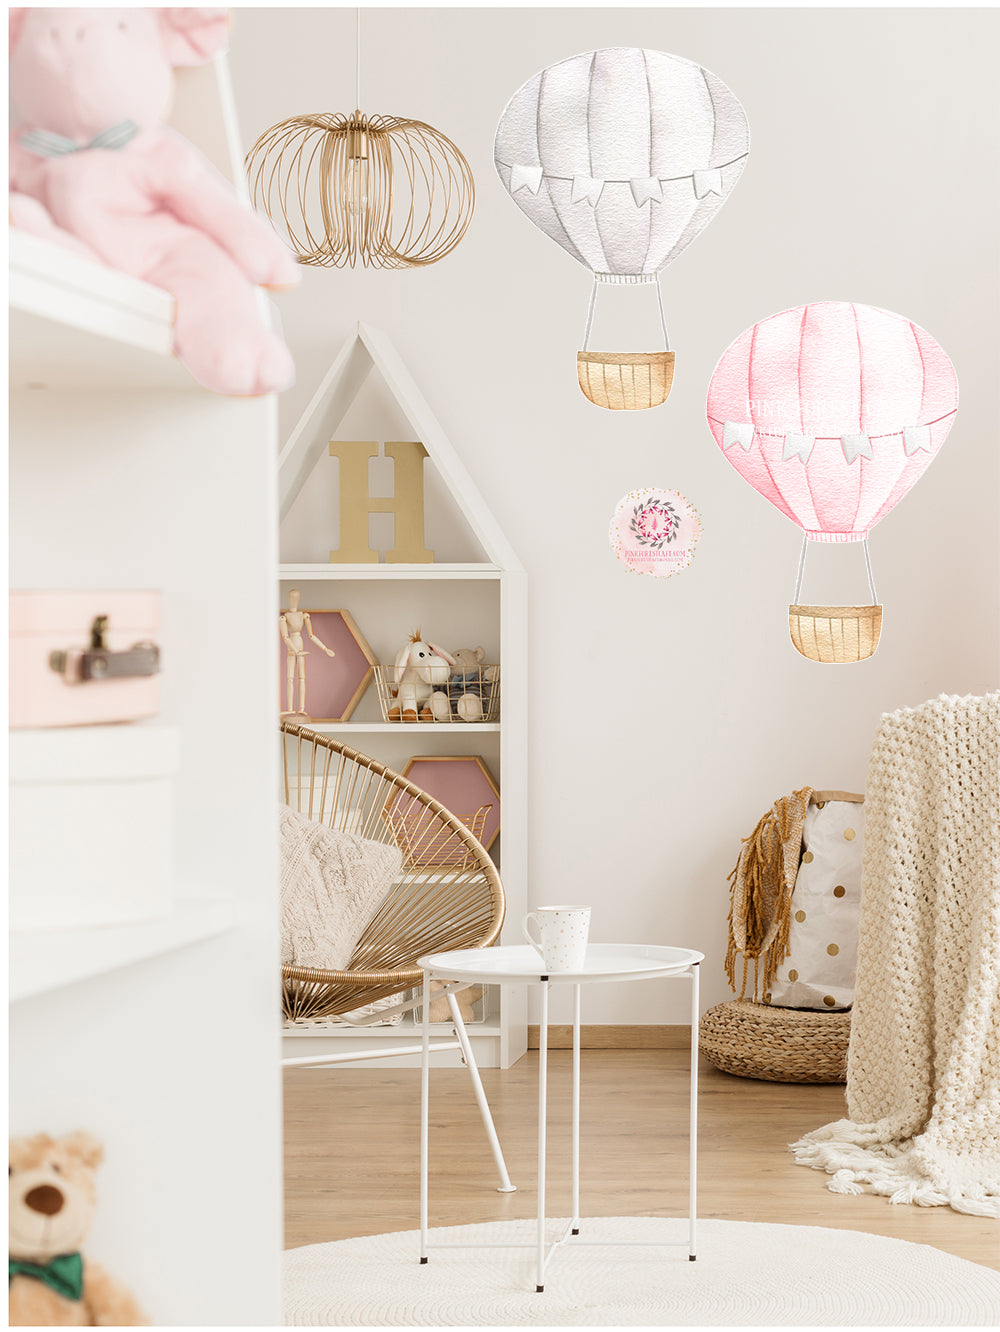 2 Hot Air Balloon Watercolor Wall Decal Sticker Baby Girl Nursery Art –  Pink Forest Cafe